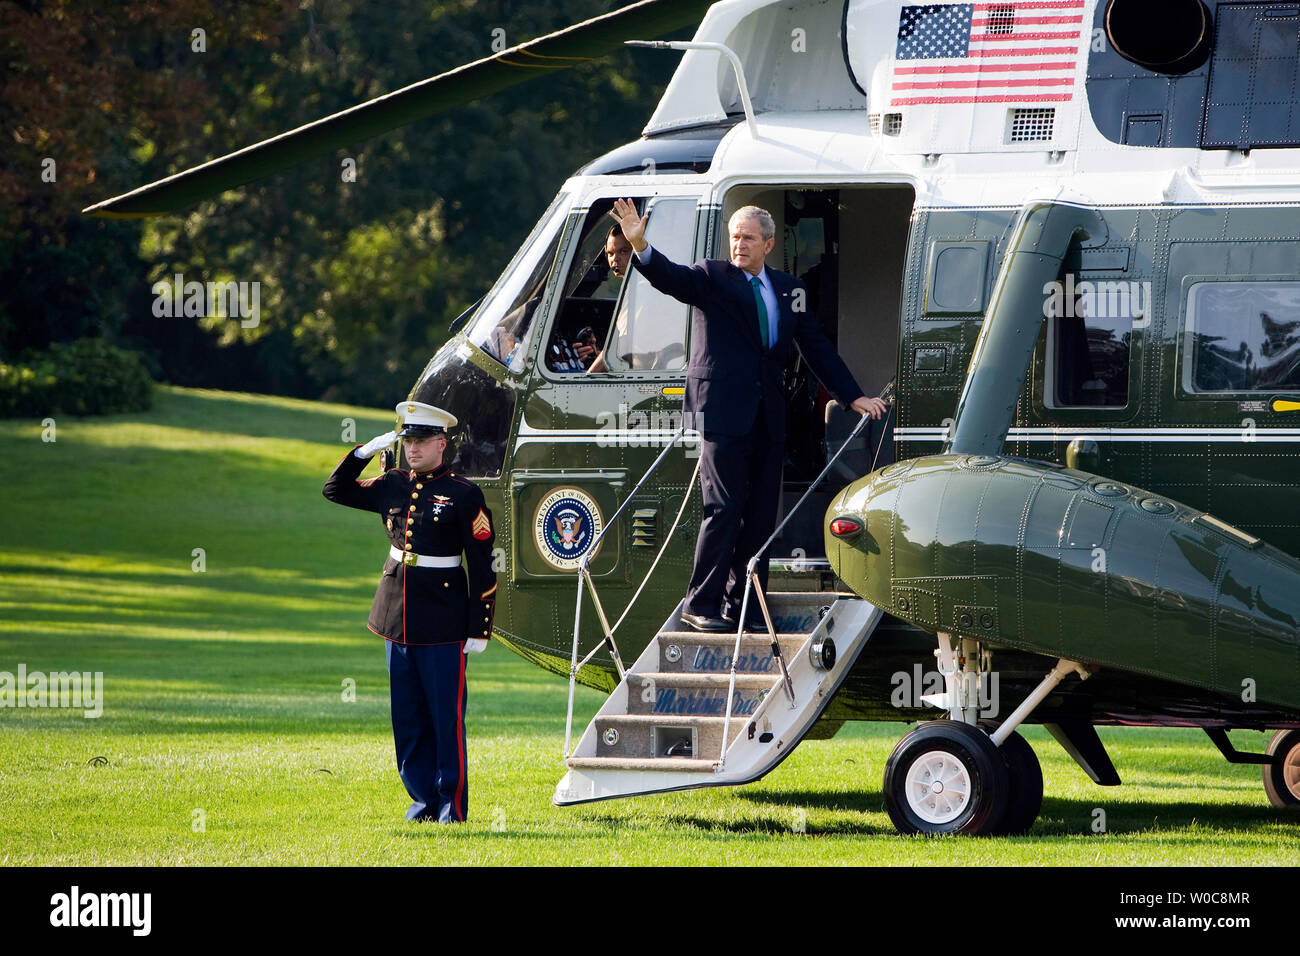 U.S. President George W. Bush waves as he boards Marine One on the South Lawn of the White House in Washington on August 15, 2008. President Bush is traveling to his ranch in Crawford, Texas. (UPI Photo/Patrick D. McDermott) Stock Photo